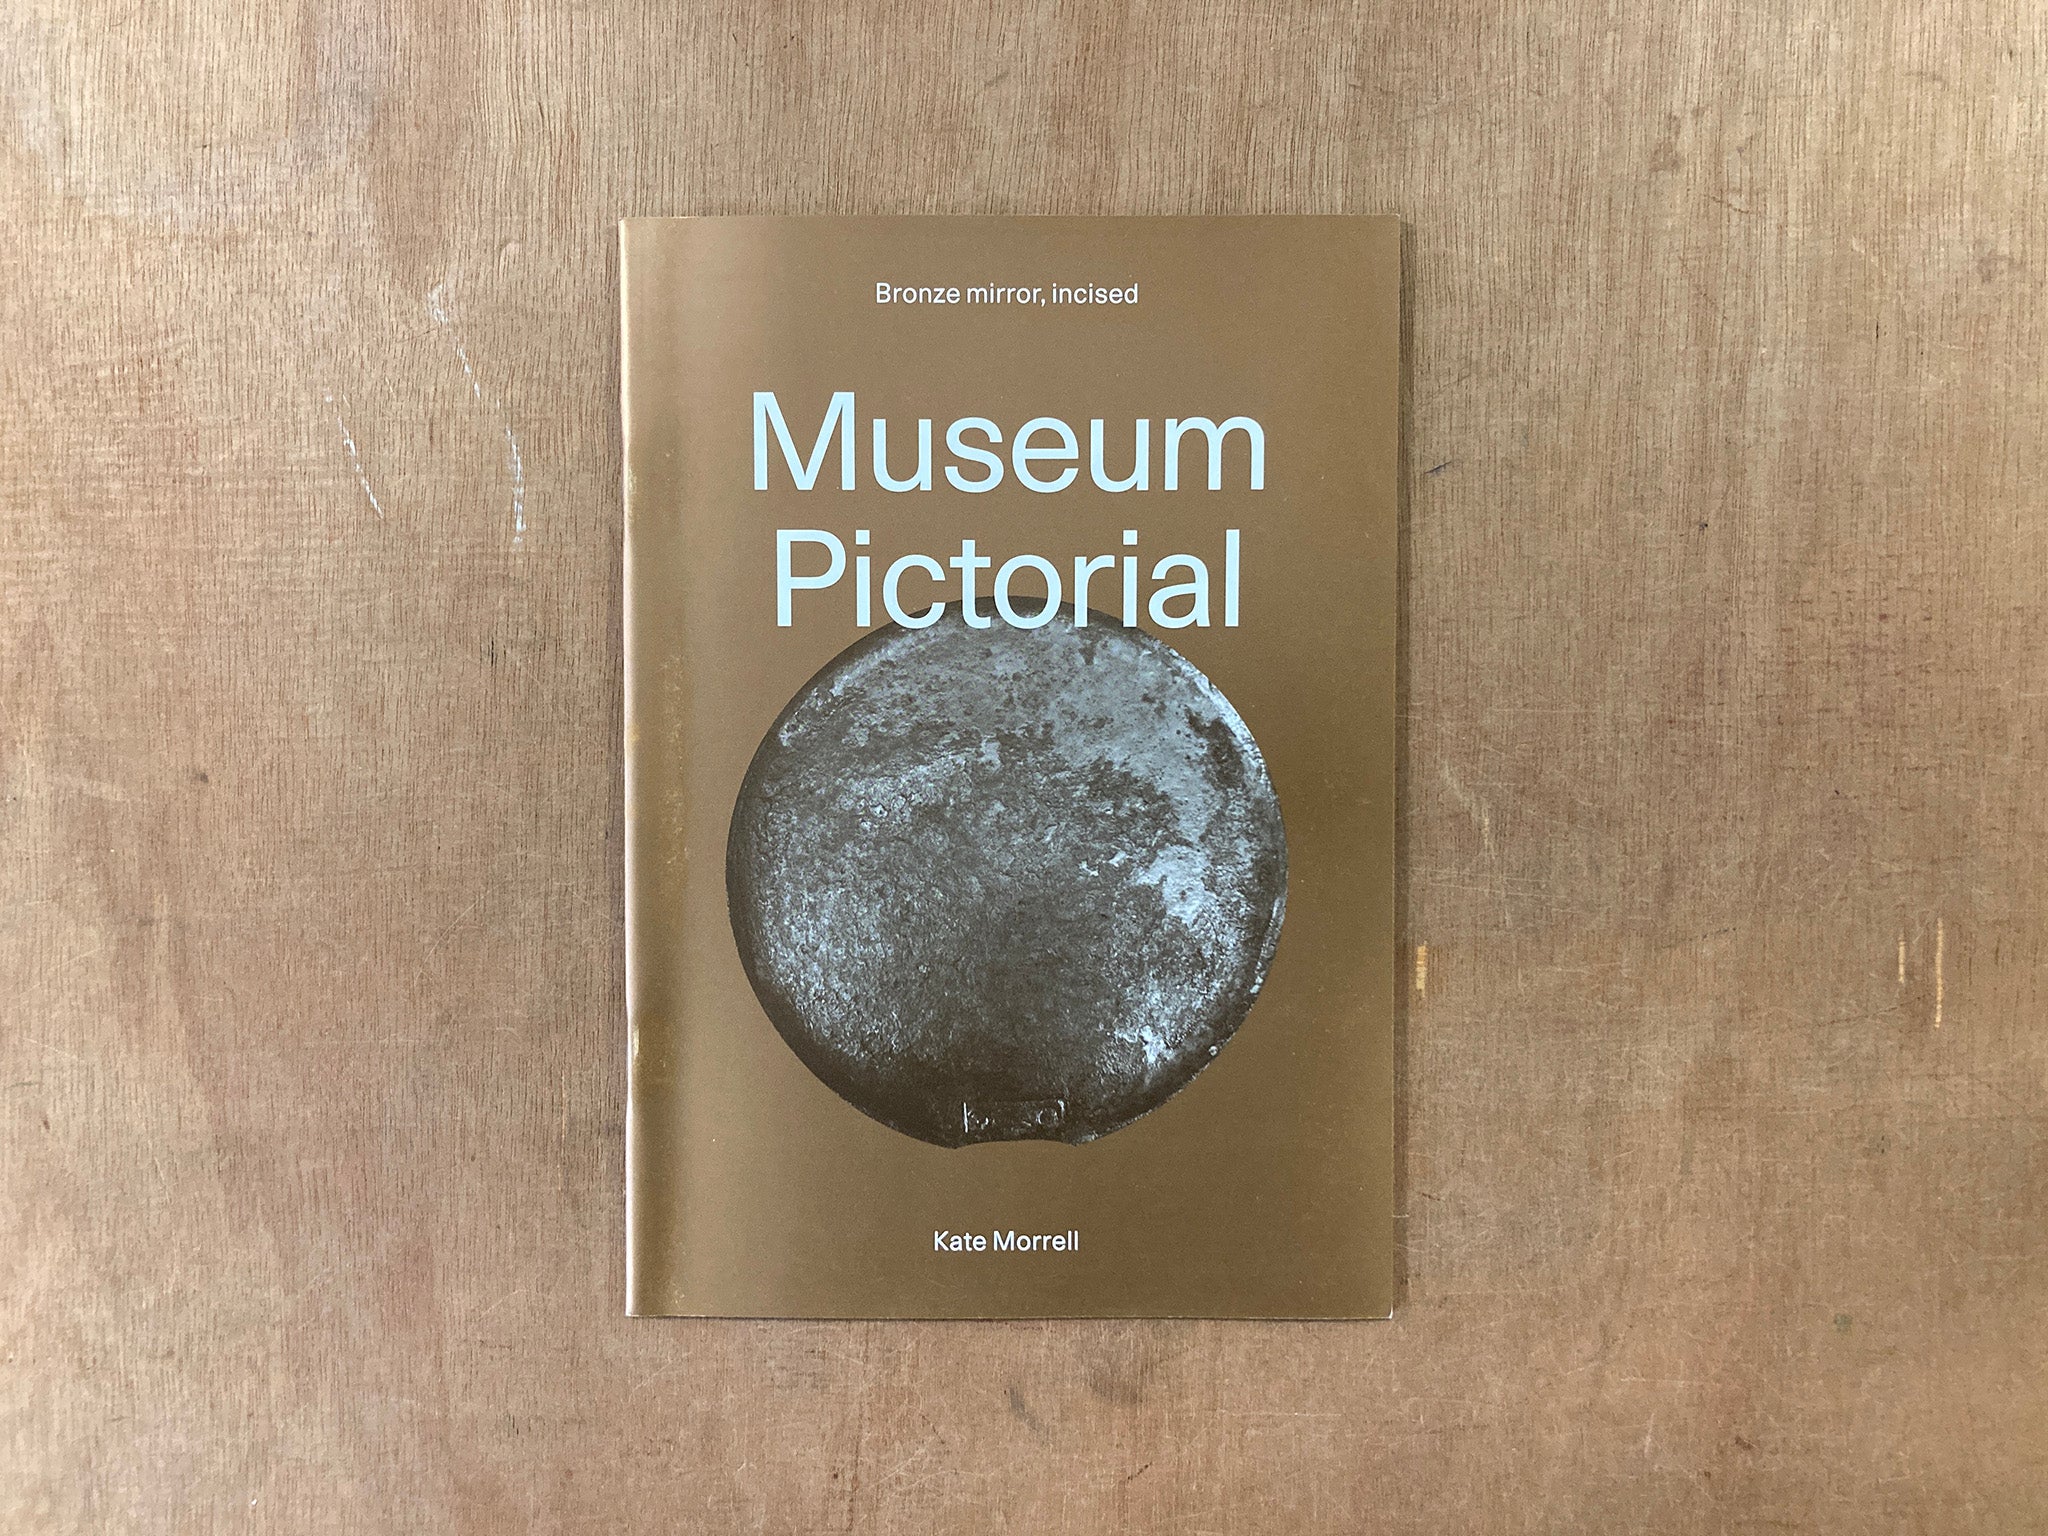 MUSEUM PICTORIAL: BRONZE MIRROR, INCISED by Kate Morrell